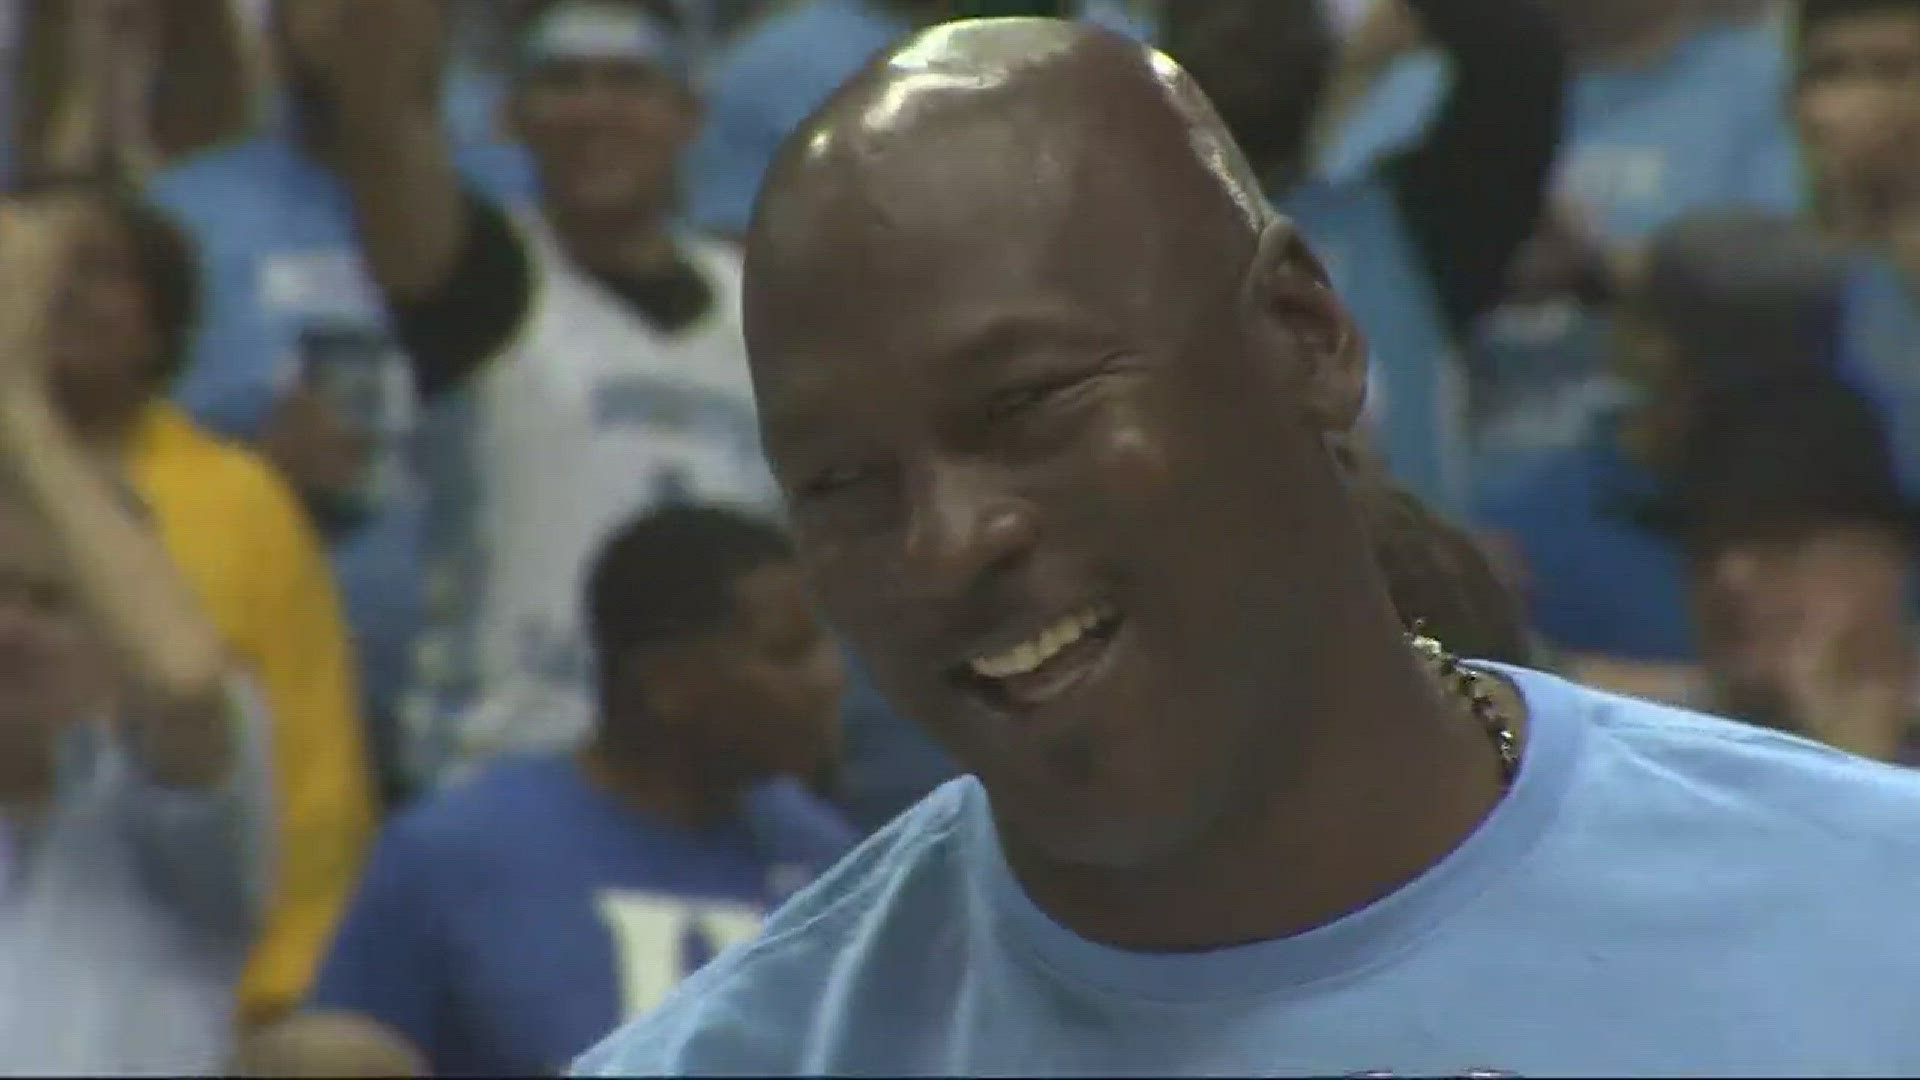 Novant Health and Michael Jordan announced Monday a $7 million gift to open two new health clinics.